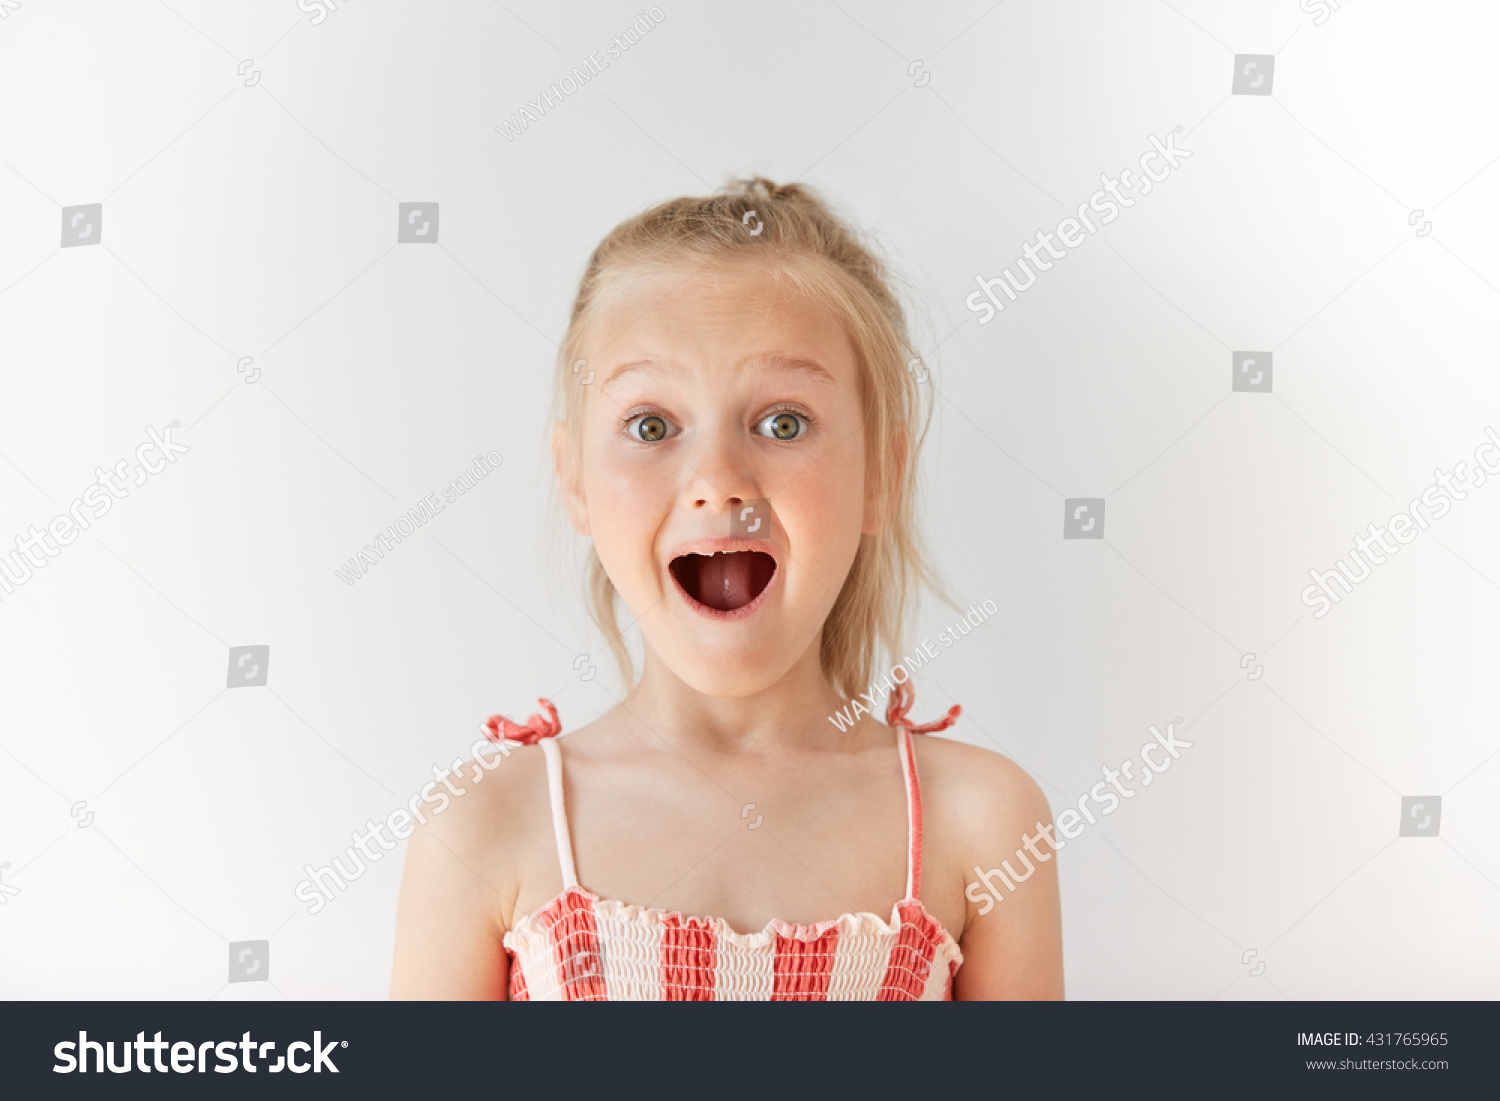 Little European girl opening mouth in surprise and raising her eyebrows with wonder. Blond child with naive glance, trustful simplicity and amazed face. #431765965